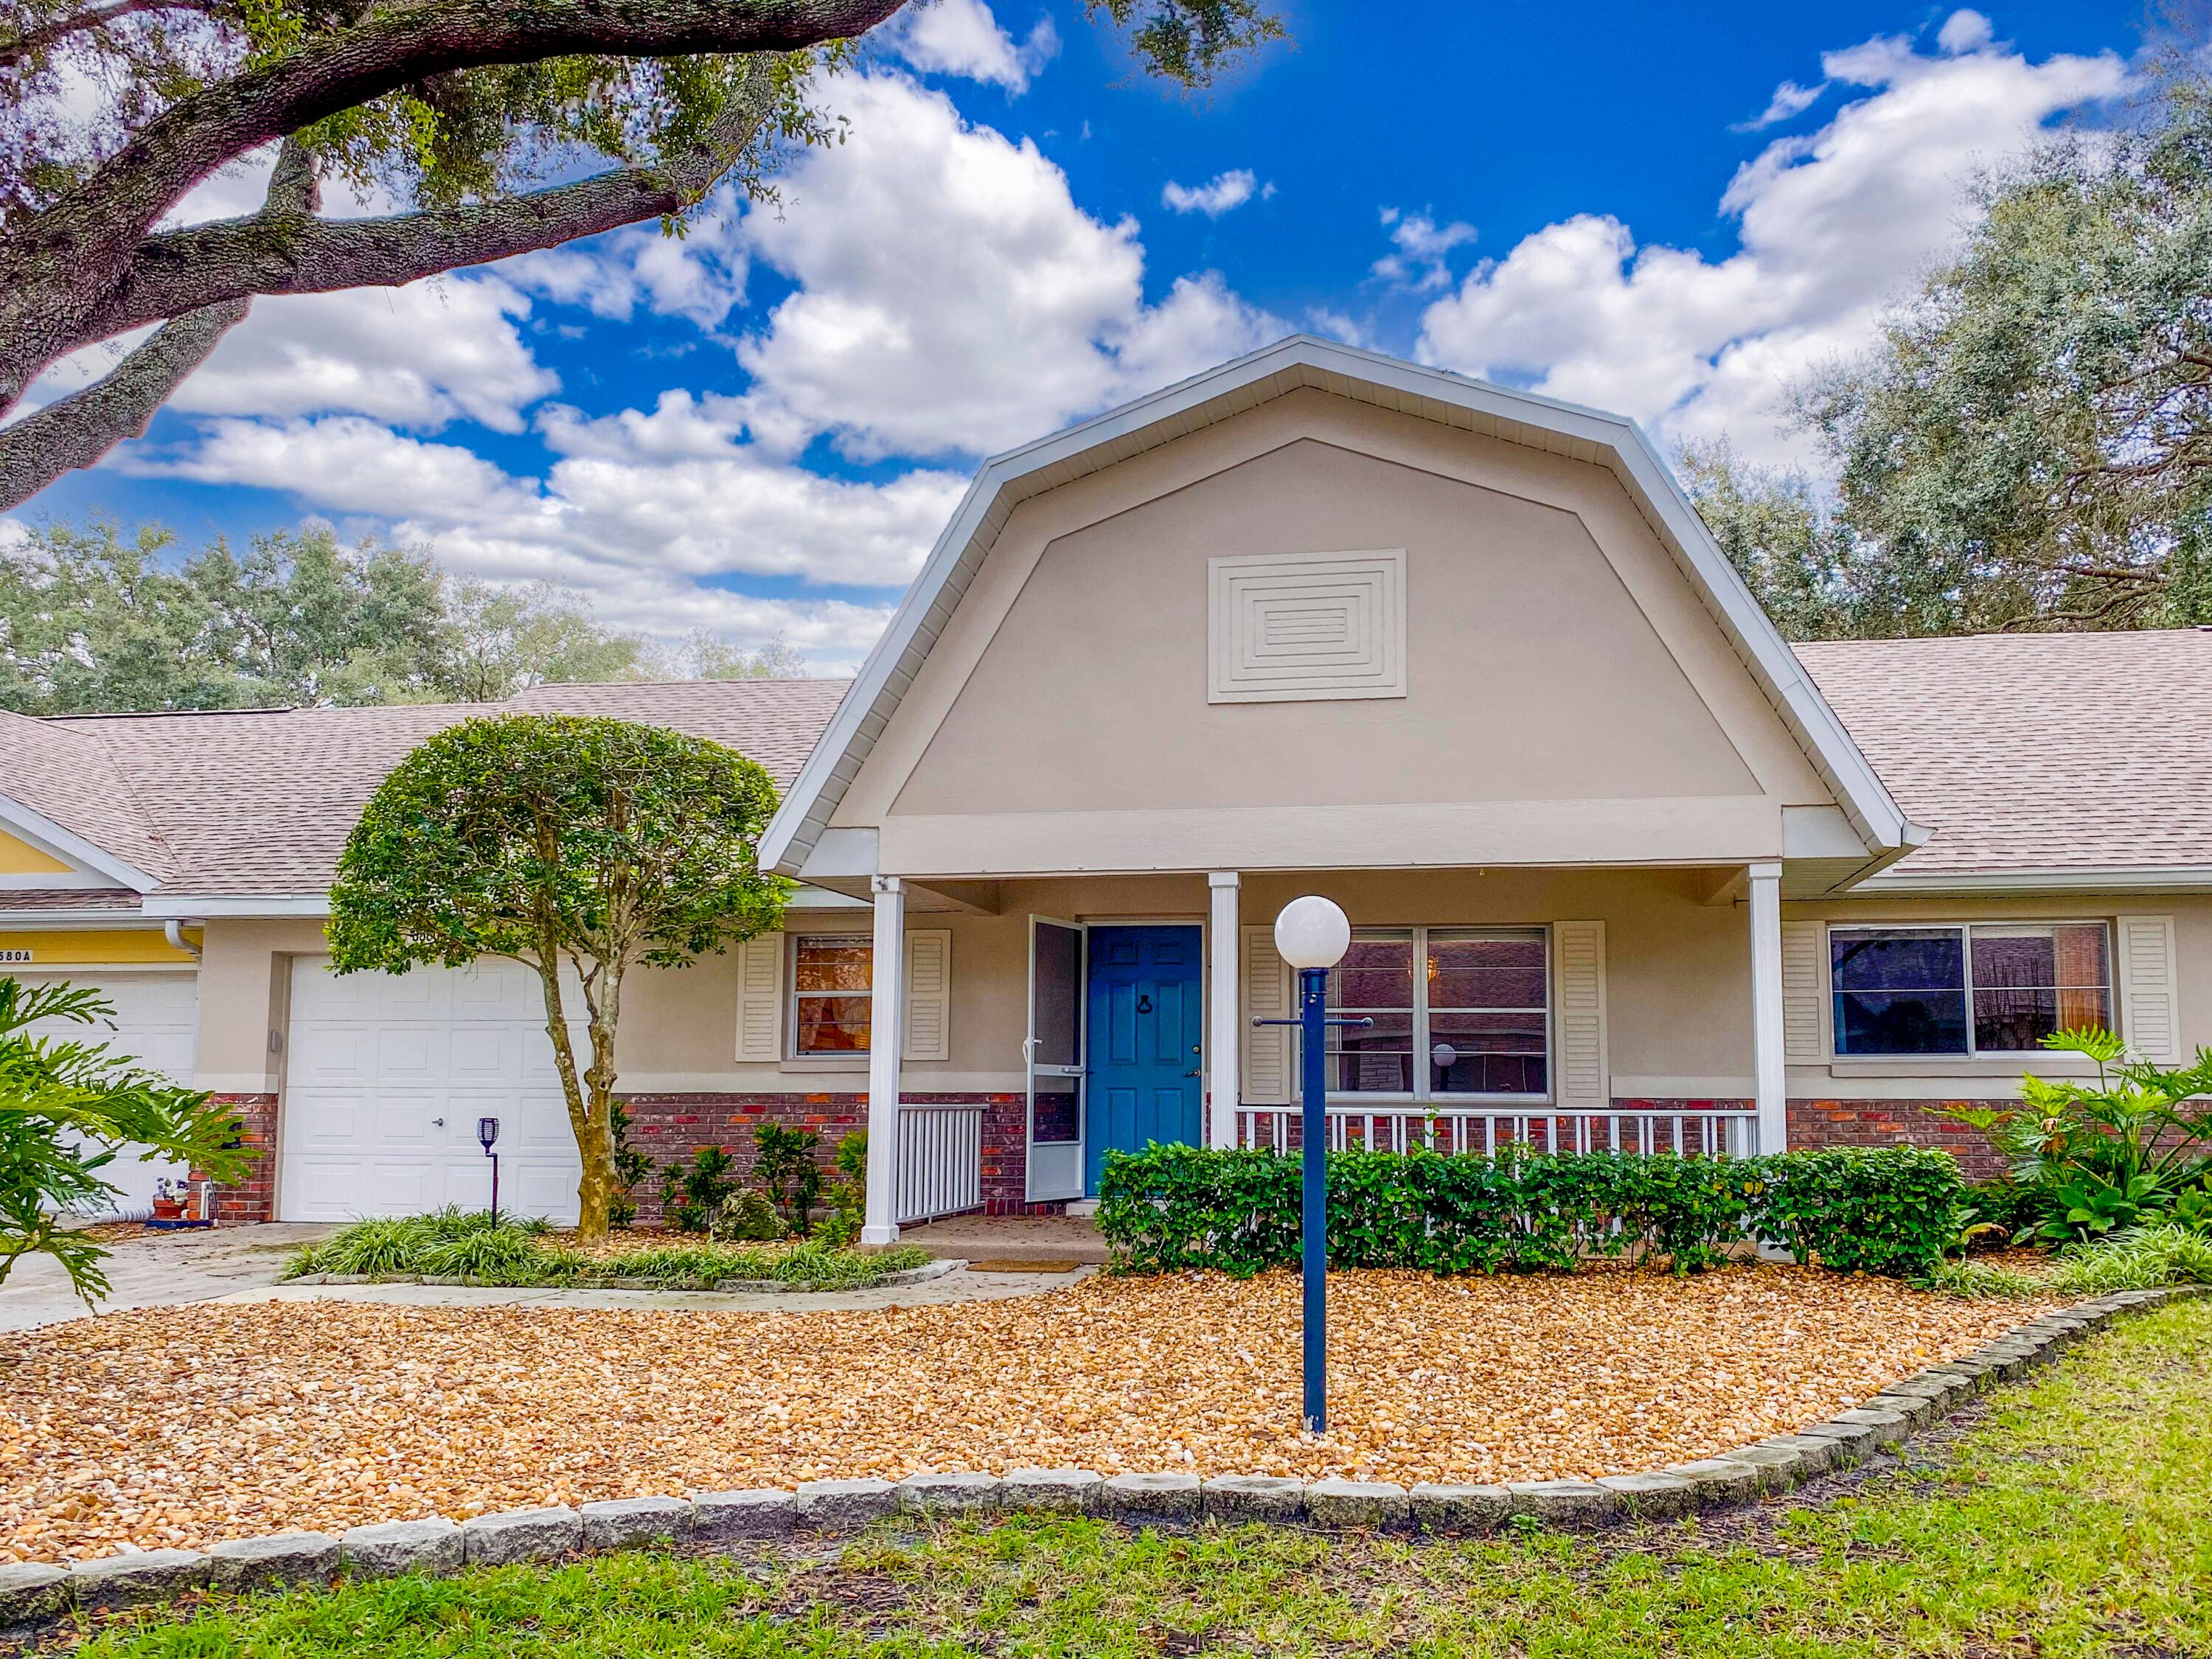 Welcome to this charming villa in On Top of the World, a premier active adult community offering an unbeatable array of recreational activities in retirement !